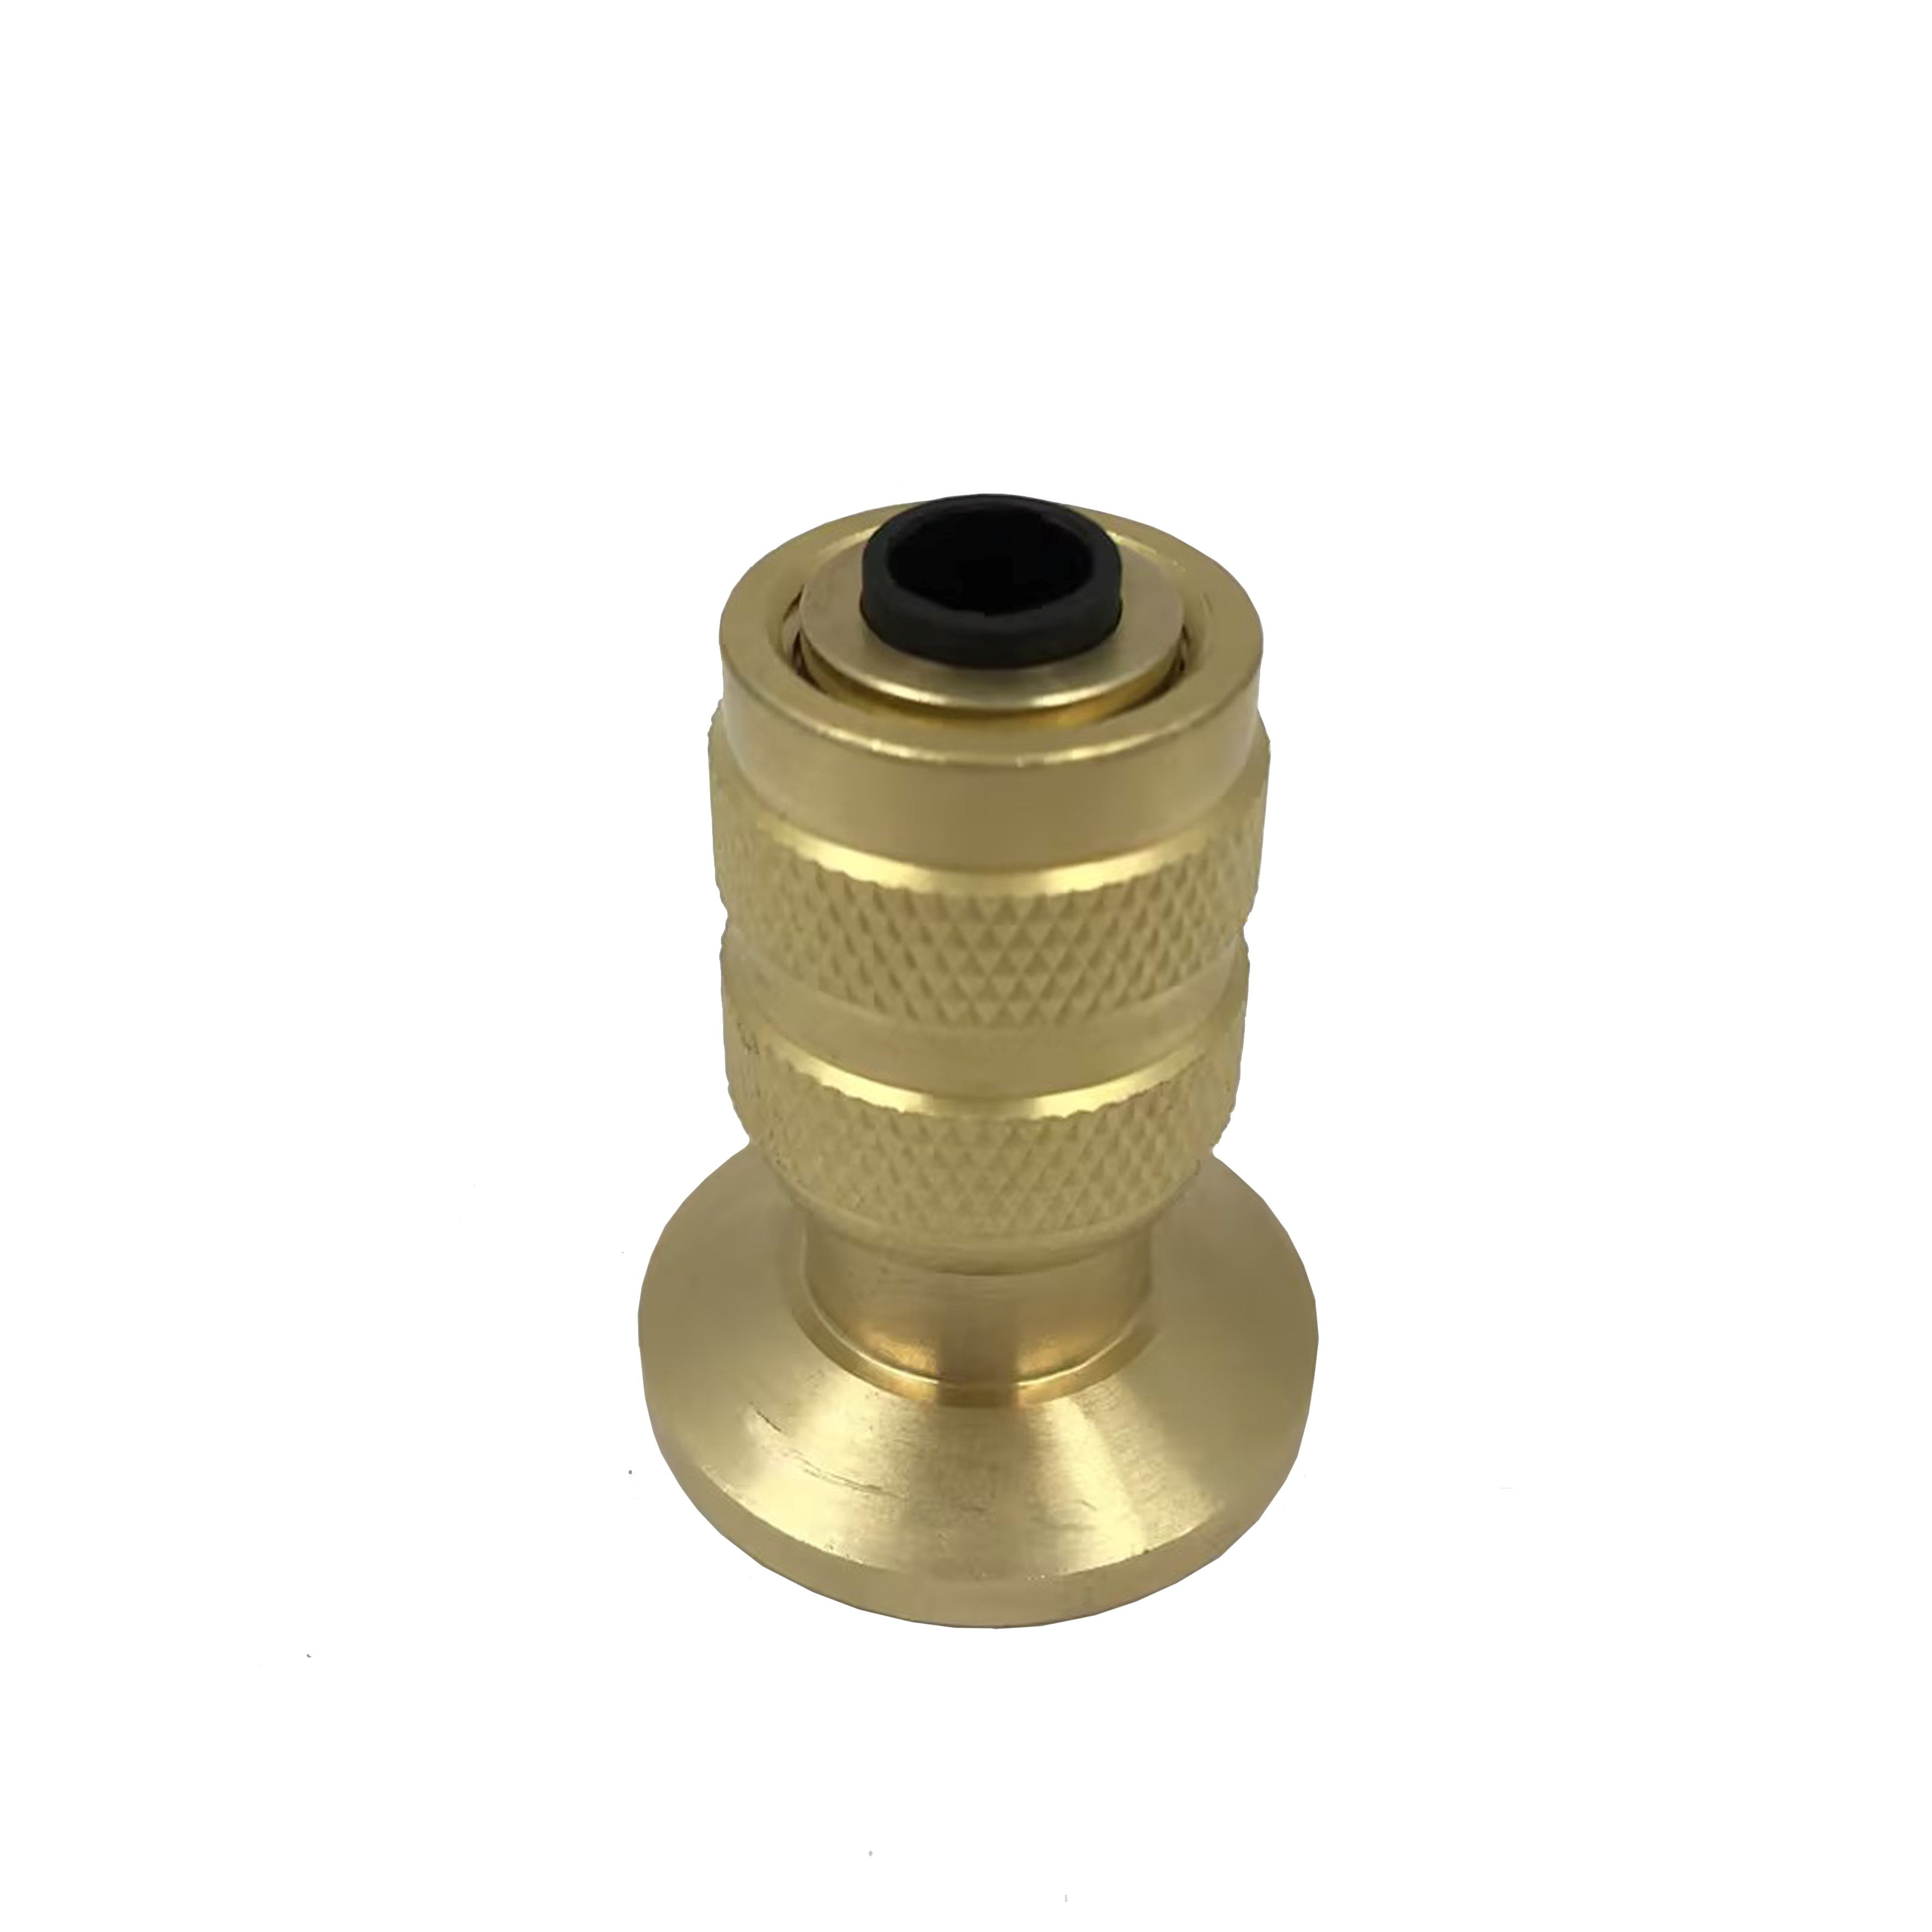 Replacement 3/8” Adaptor for VacMaxx Hose Kit